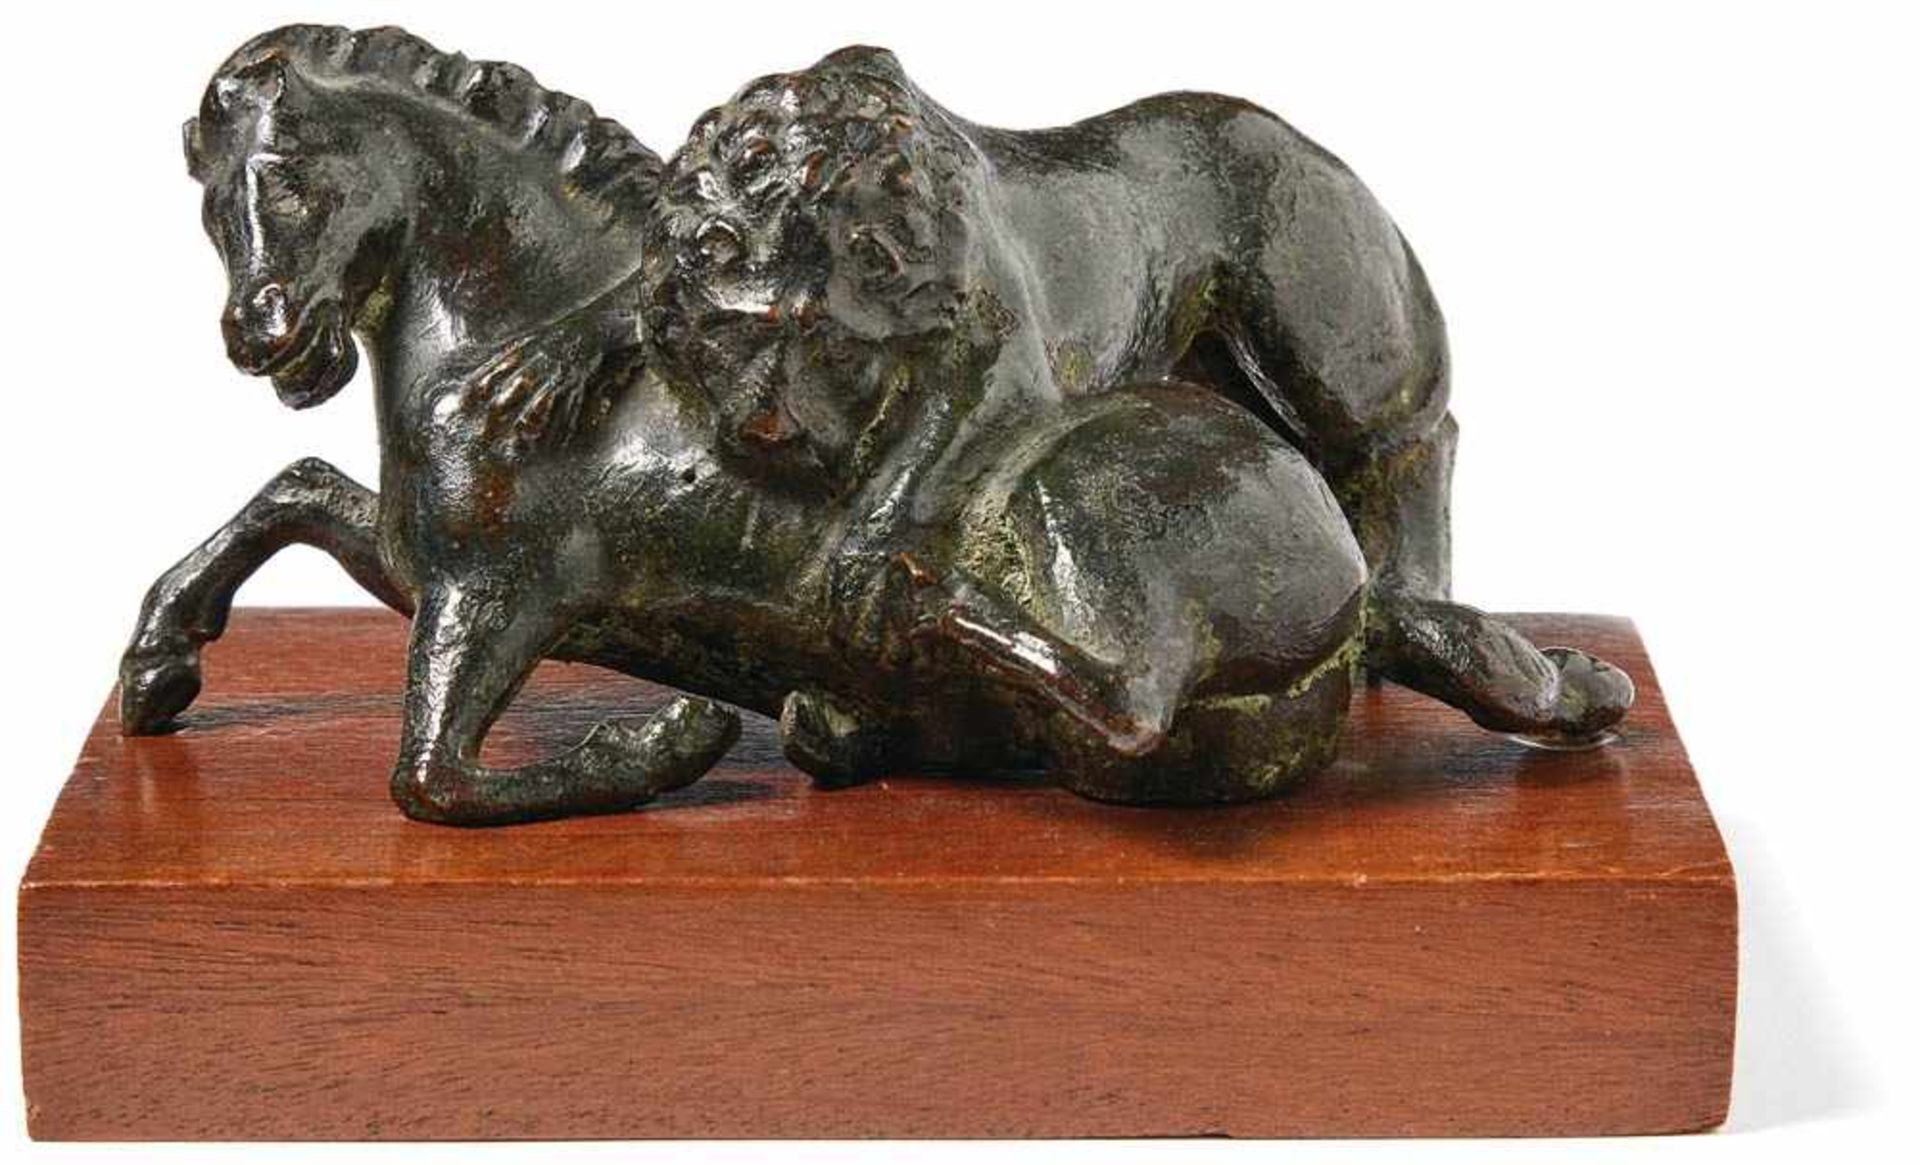 Lion, tearing a horseNetherlands, early 17th centuryA fully sculptured group of a lying horse